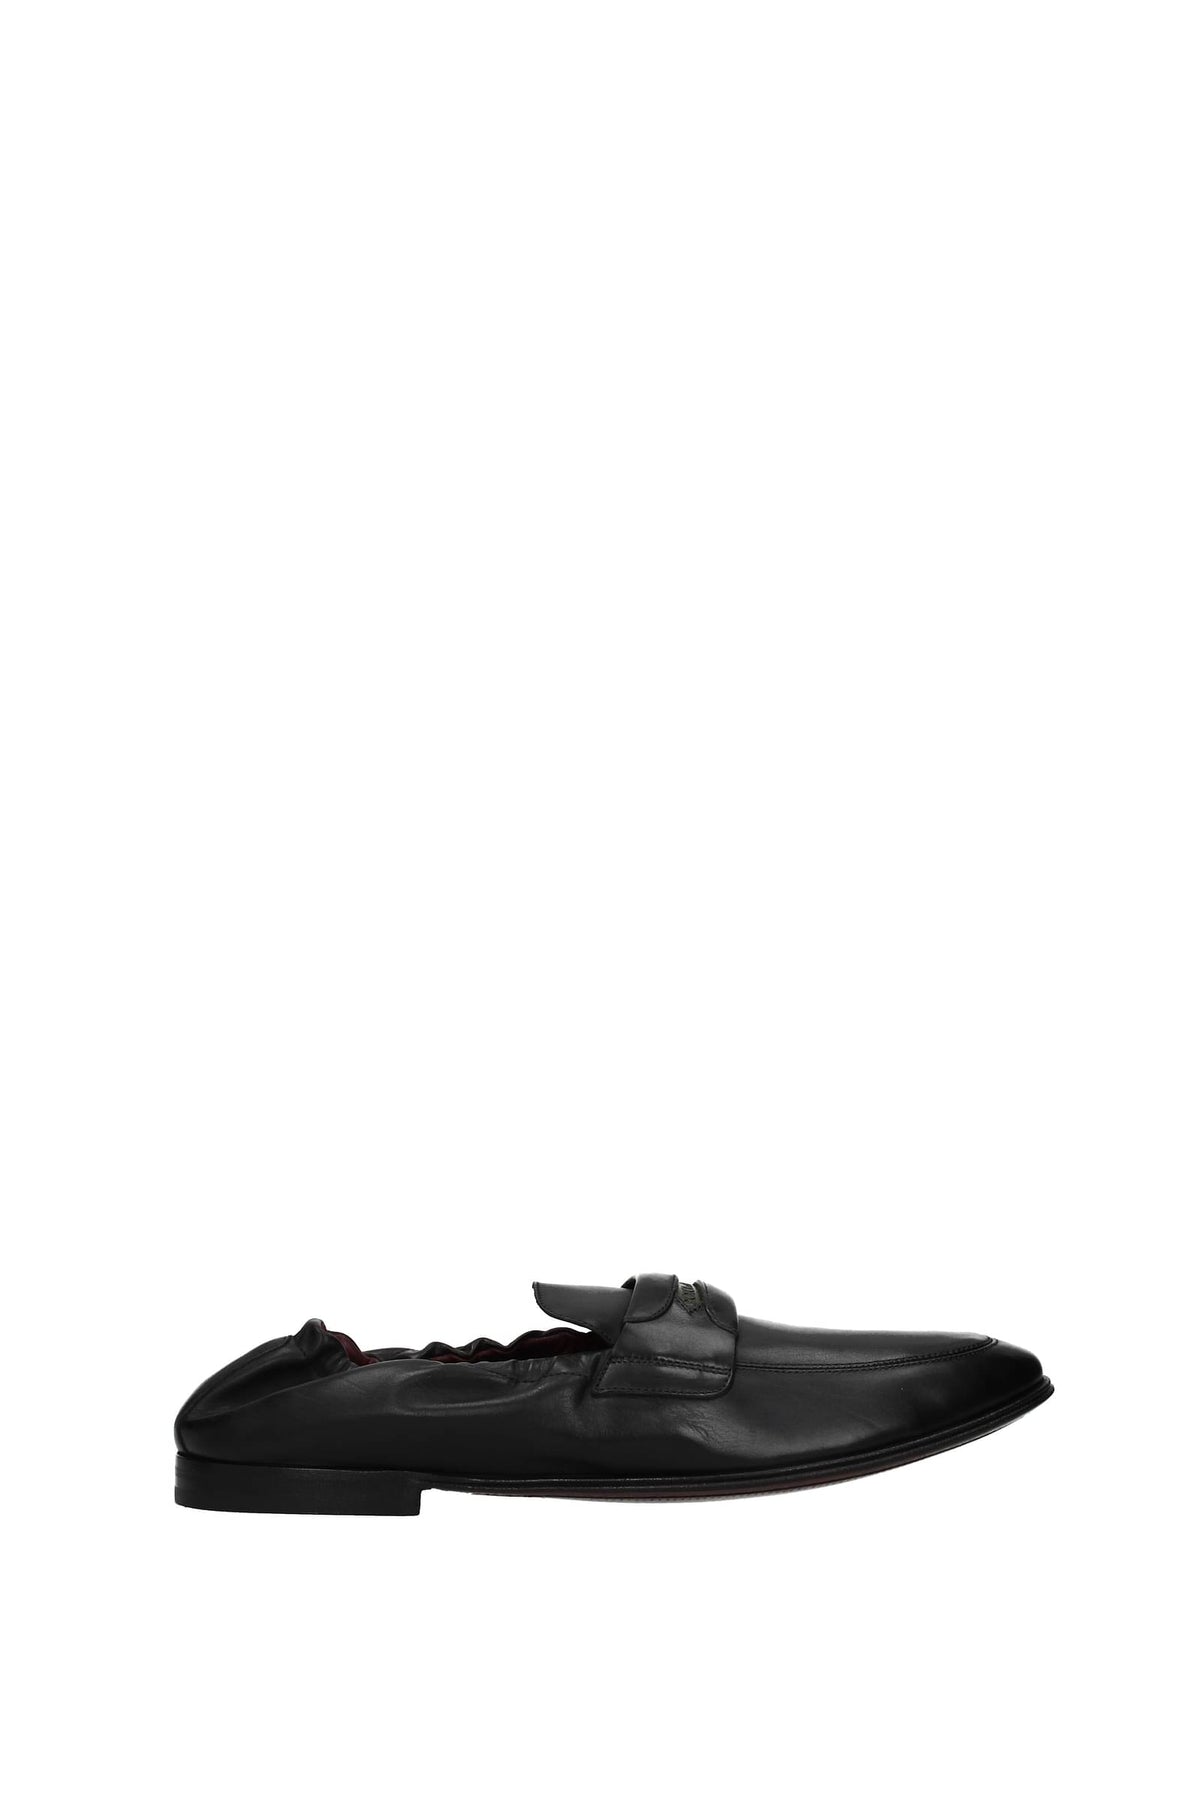 DOLCE & GABBANA LOAFERS ARIOSTO LEATHER BLACK